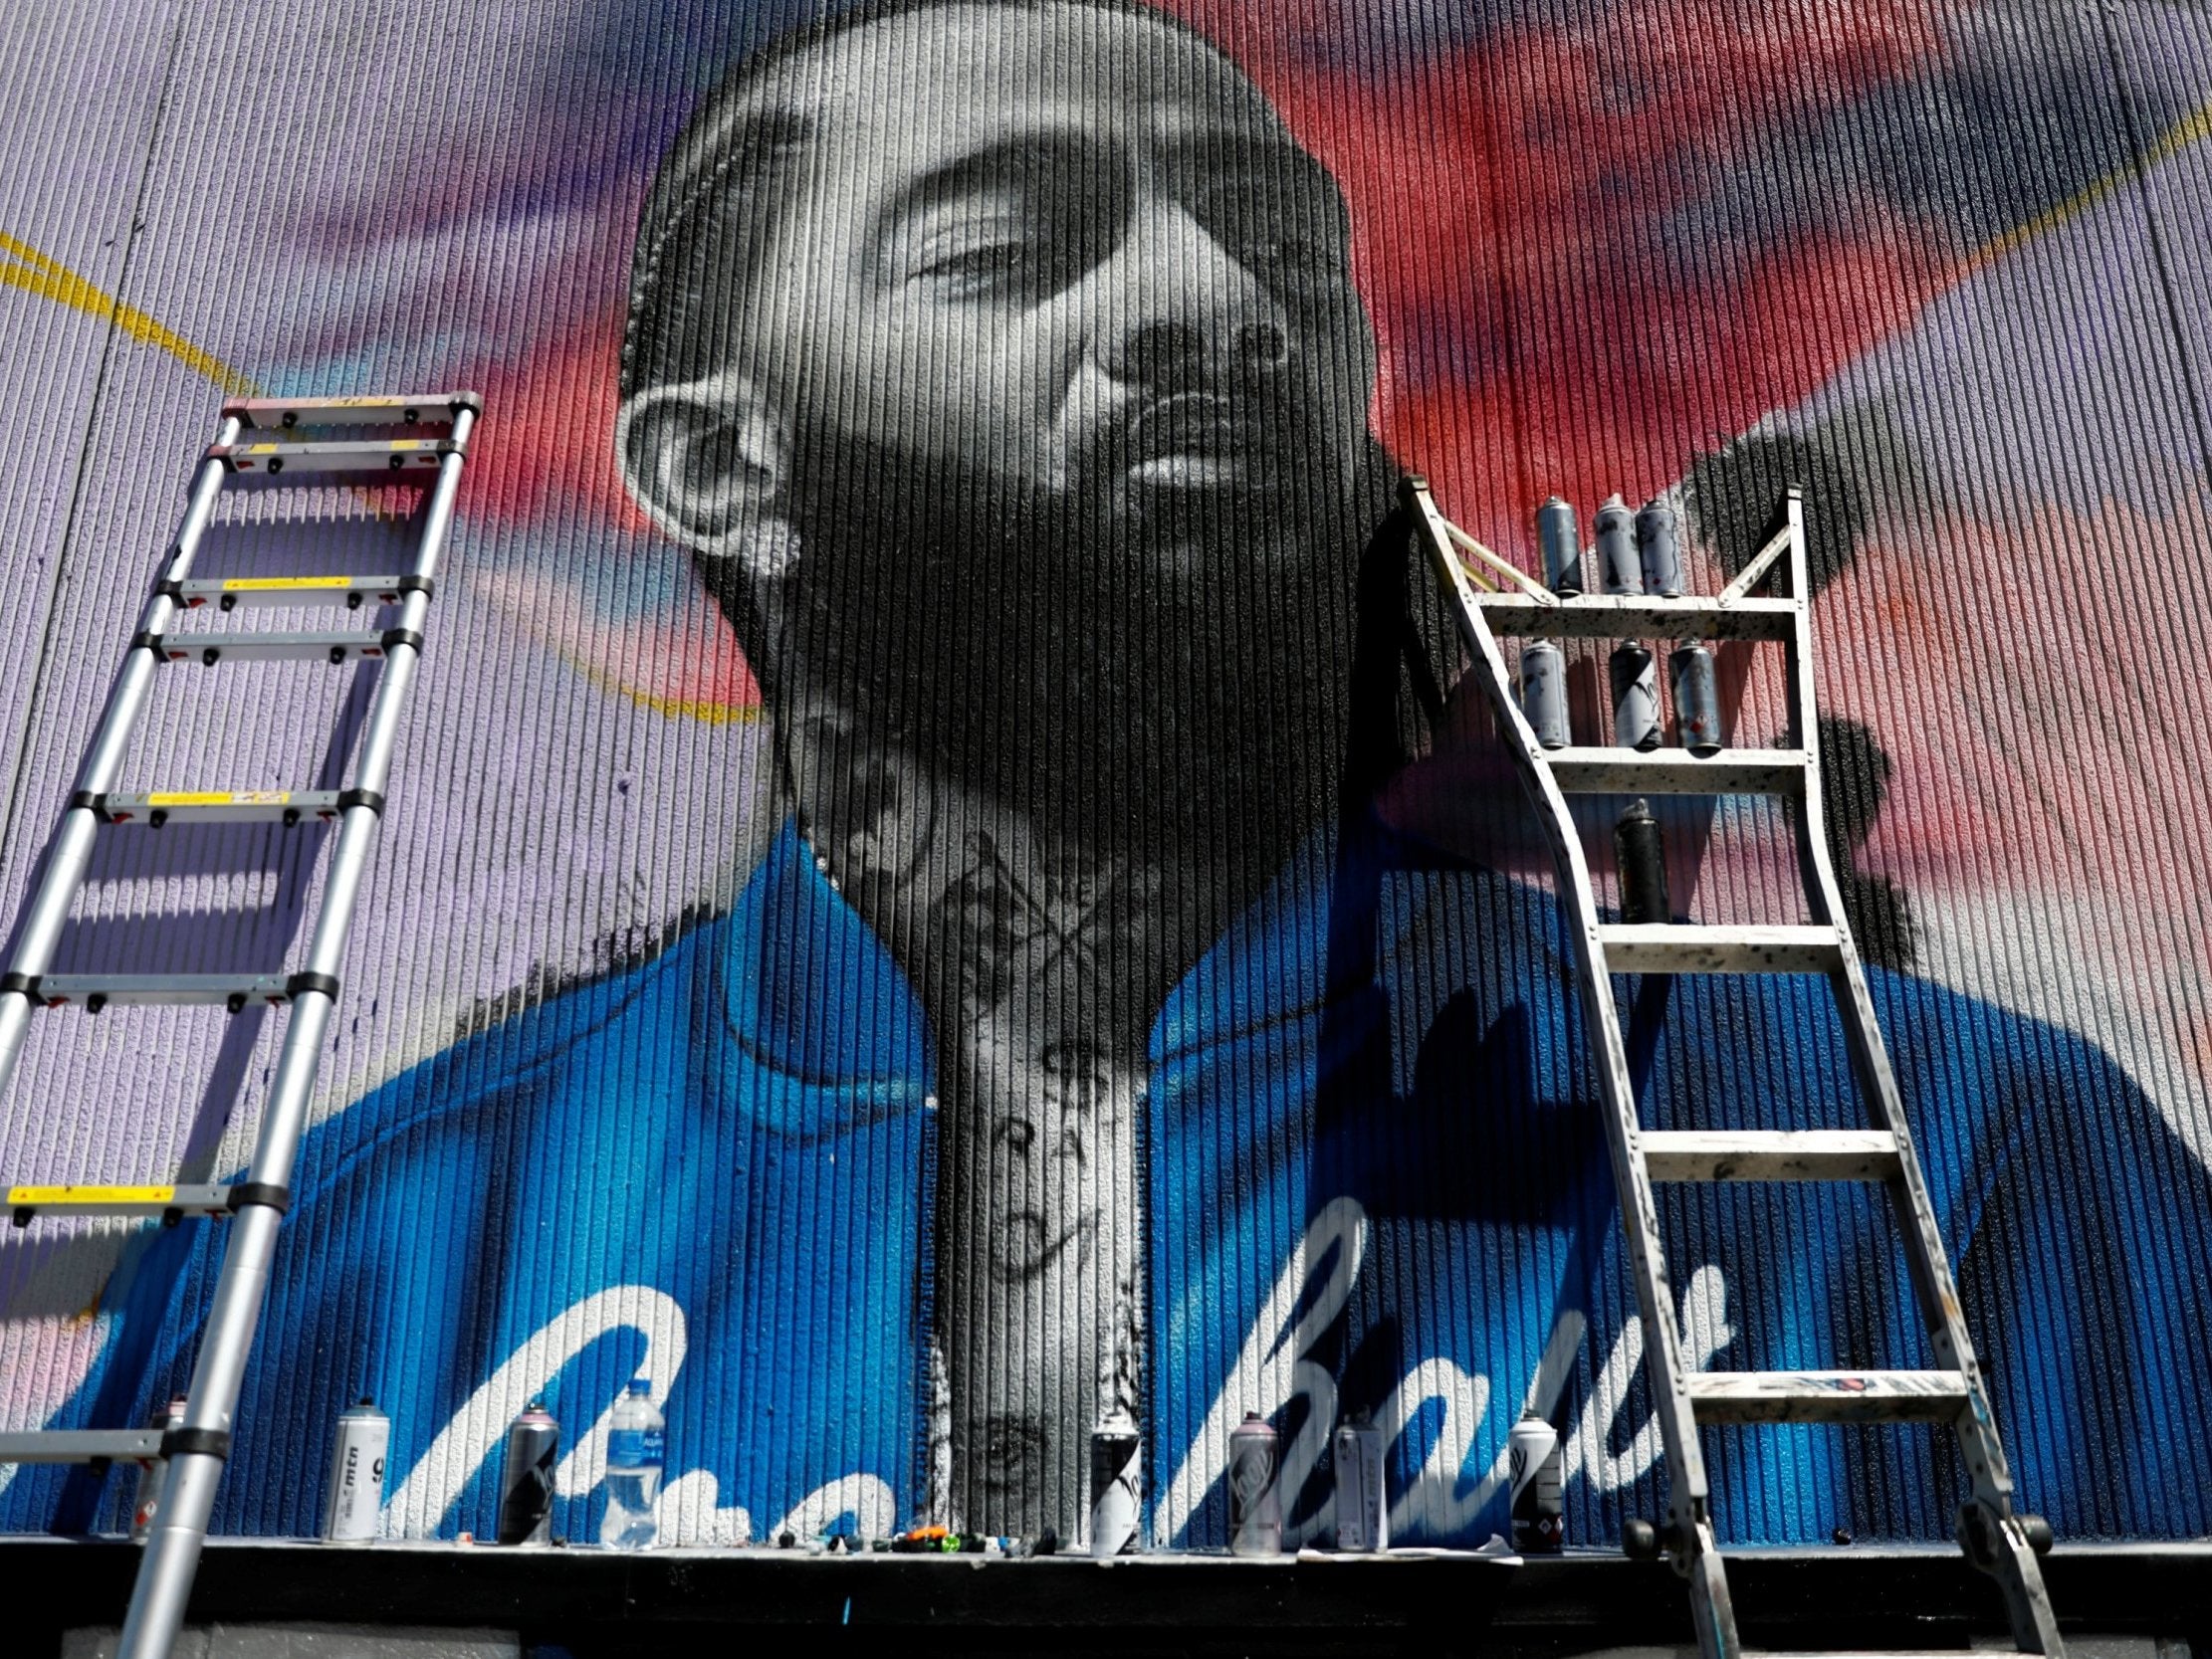 Nipsey Hussle death: Rapper died 35 minutes after shooting, death certificate says